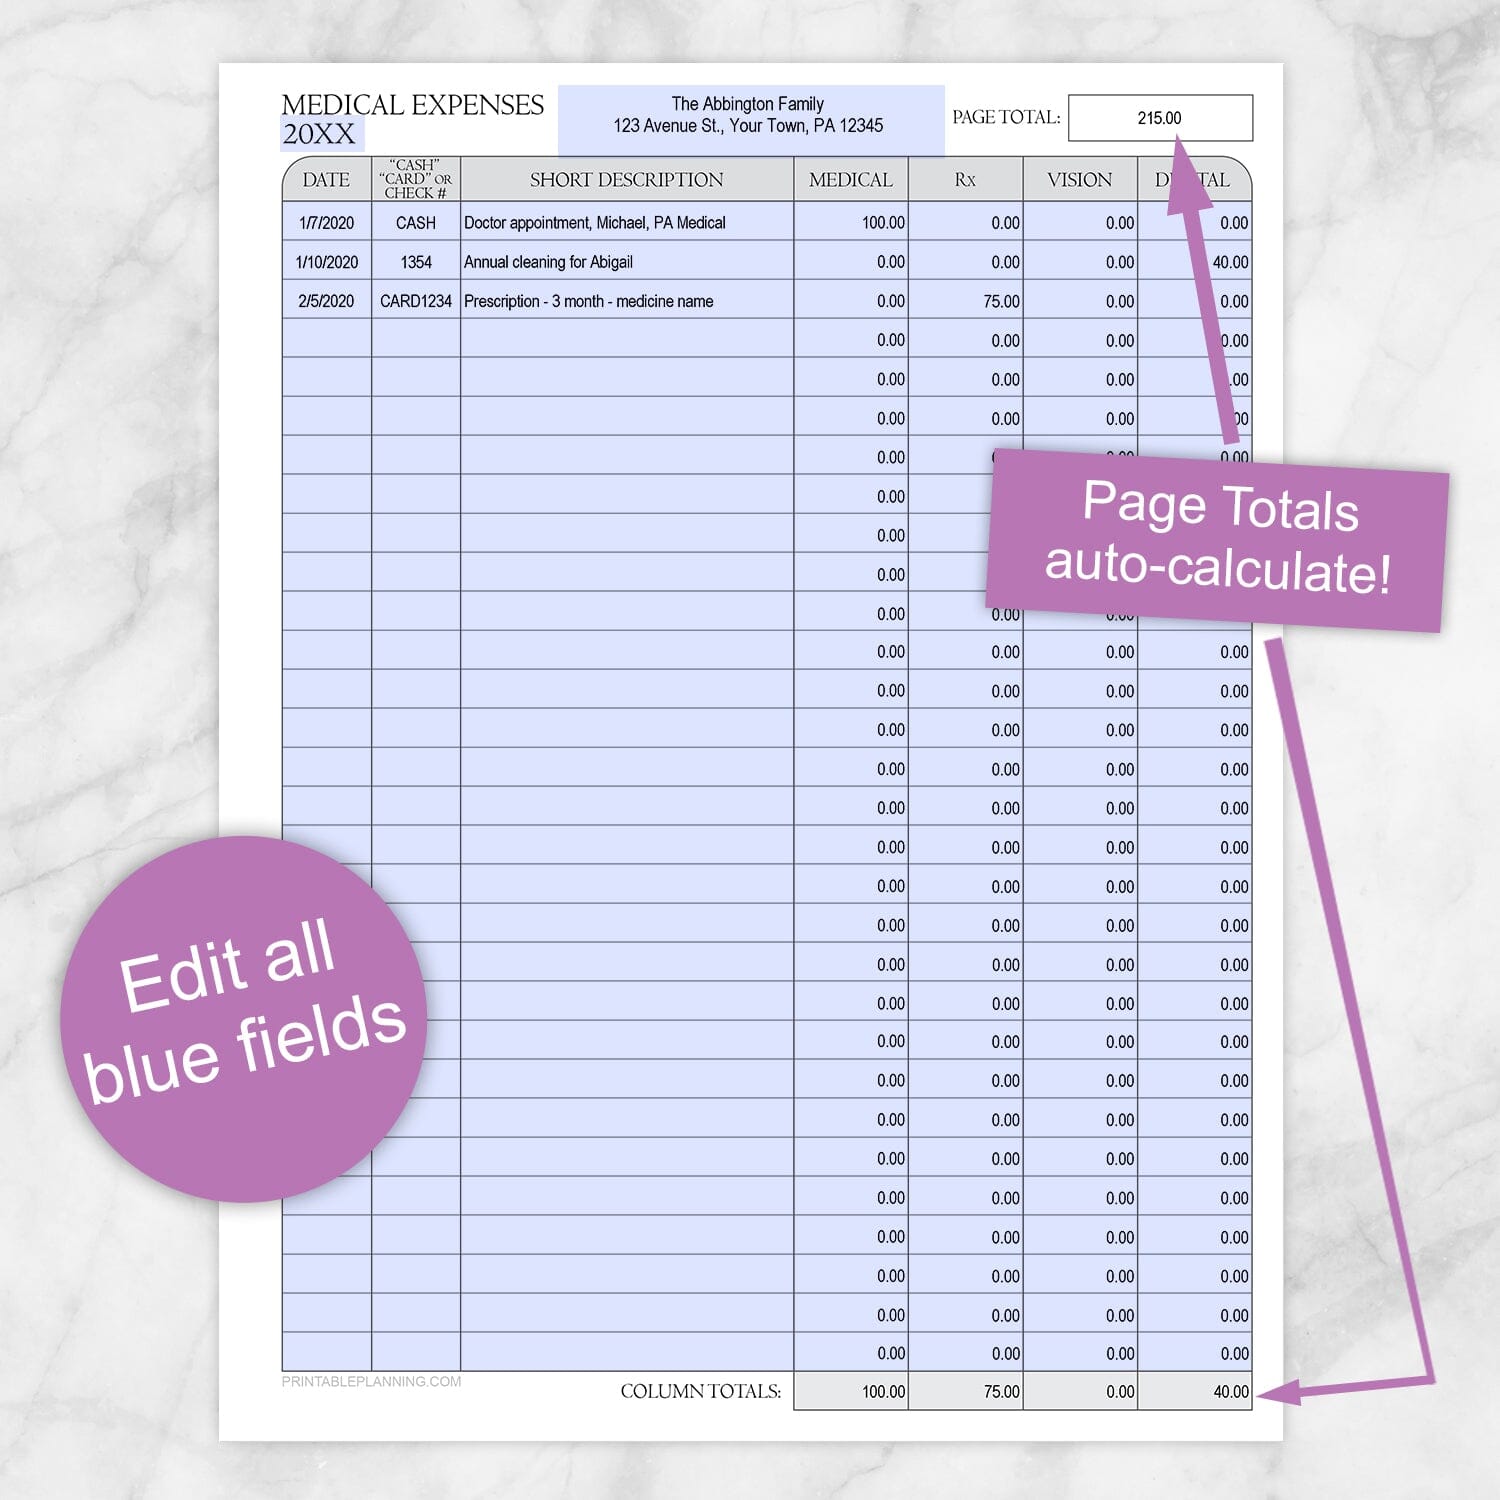 Printable Medical Expenses with Auto-Calculating Totals at Printable Planning. Infographic shows that you can edit all blue fields and that tjhe page totals auto-calculate.